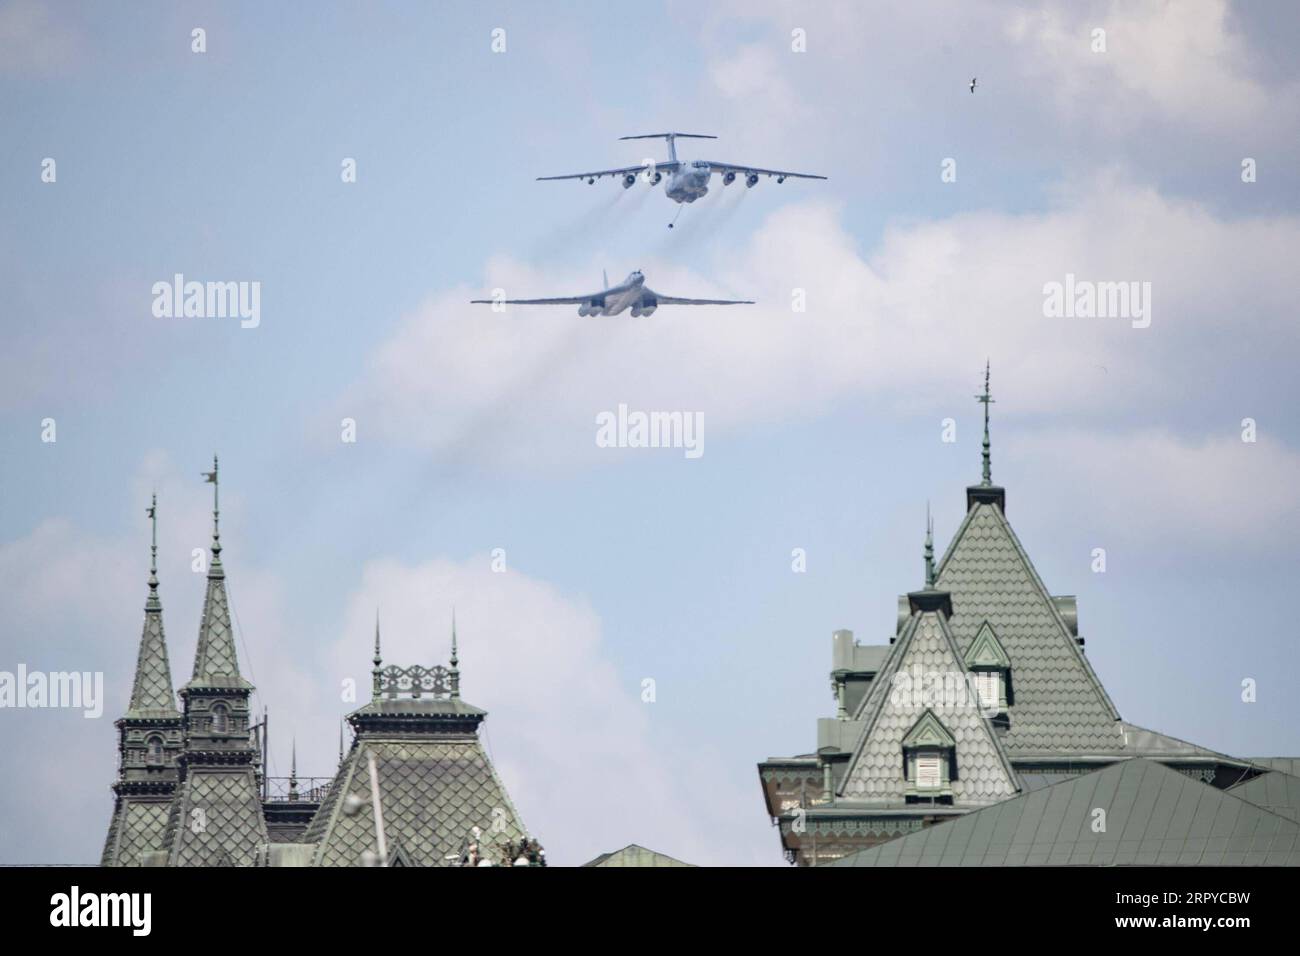 200624 -- MOSCOW, June 24, 2020 Xinhua -- An Il-78 air tanker and a Tu-160 strategic bomber fly over the Red Square during the military parade marking the 75th anniversary of the victory in the Great Patriotic War in Moscow, Russia, on June 24, 2020. Photo by Alexander Zemlianichenko Jr/Xinhua RUSSIA-MOSCOW-VICTORY DAY PARADE PUBLICATIONxNOTxINxCHN Stock Photo